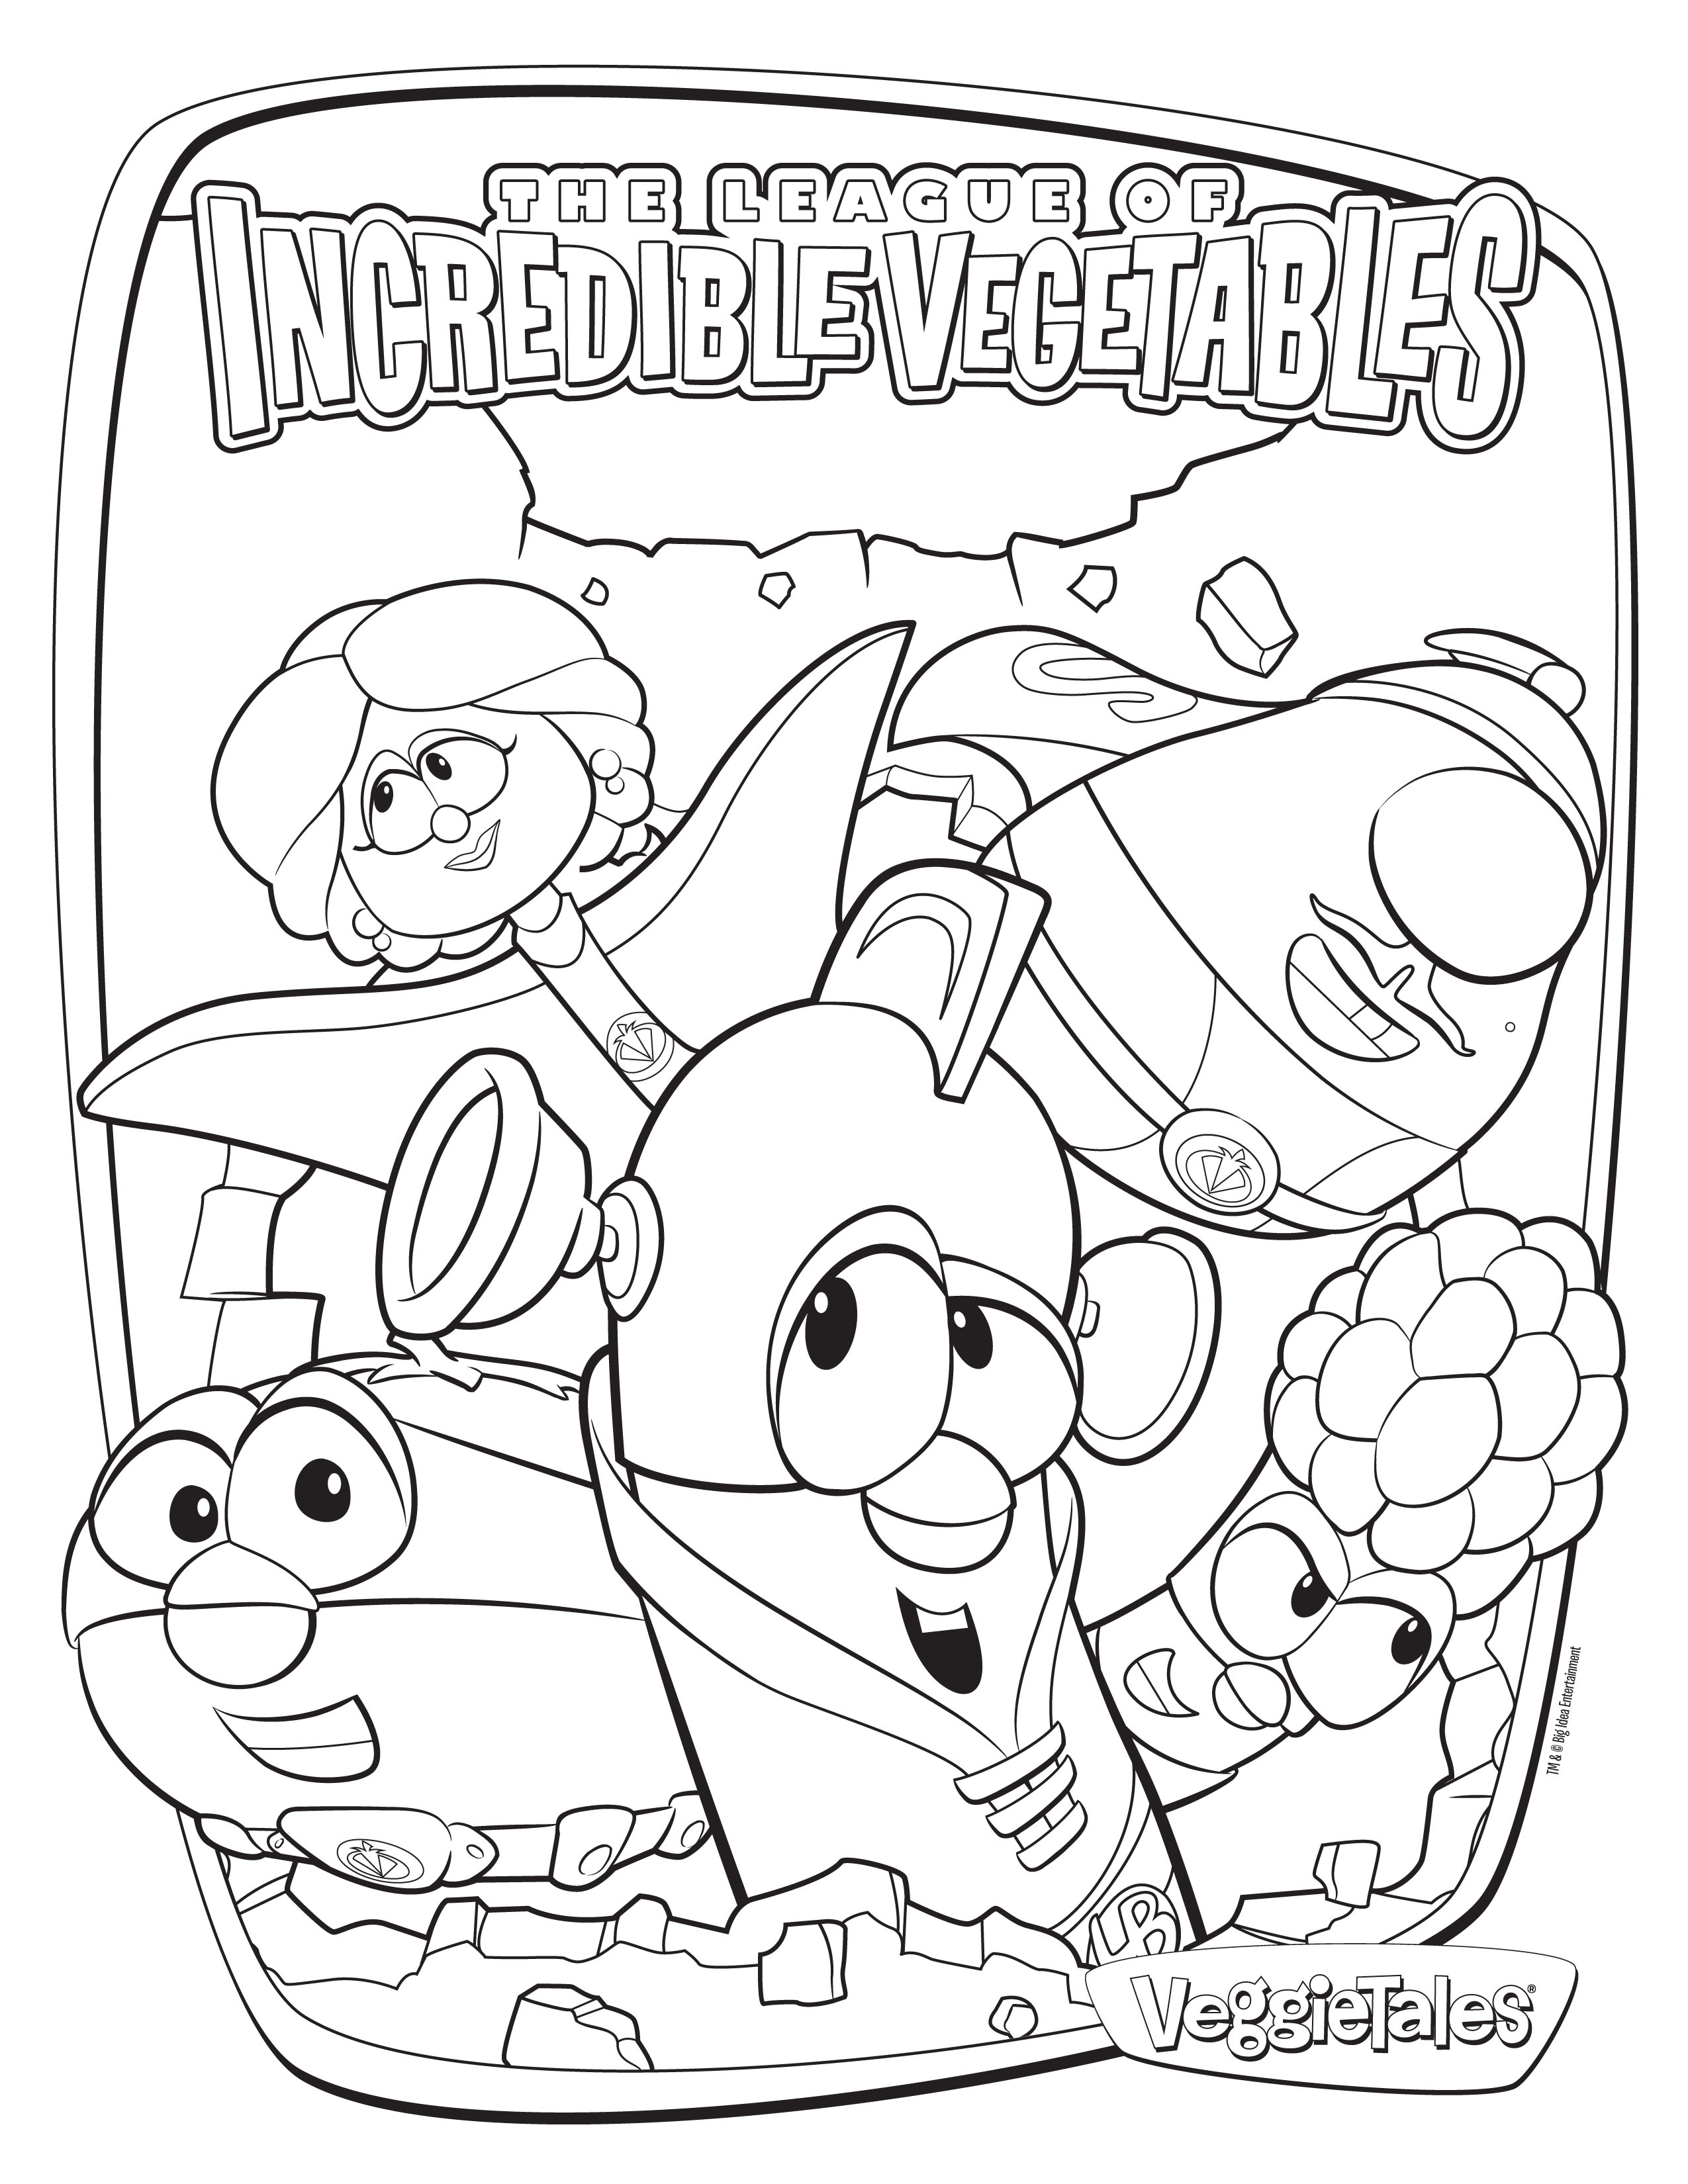 Veggie Tales Coloring Pages At GetDrawings Free Download